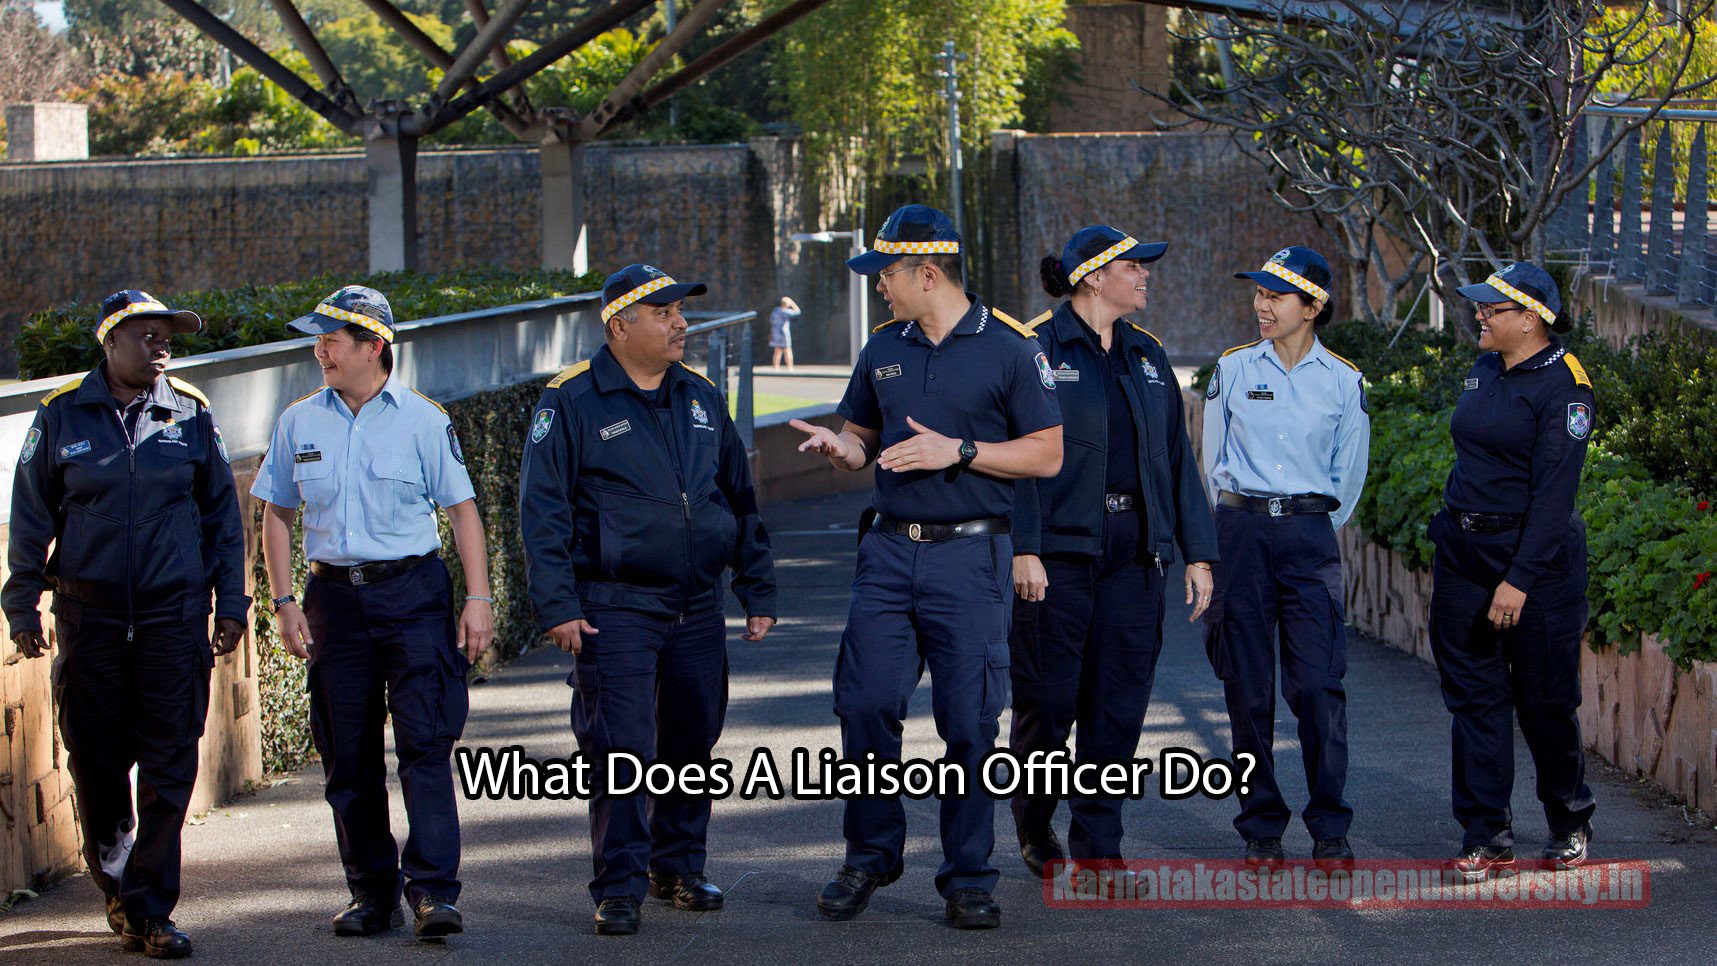 What Does A Liaison Officer Do?